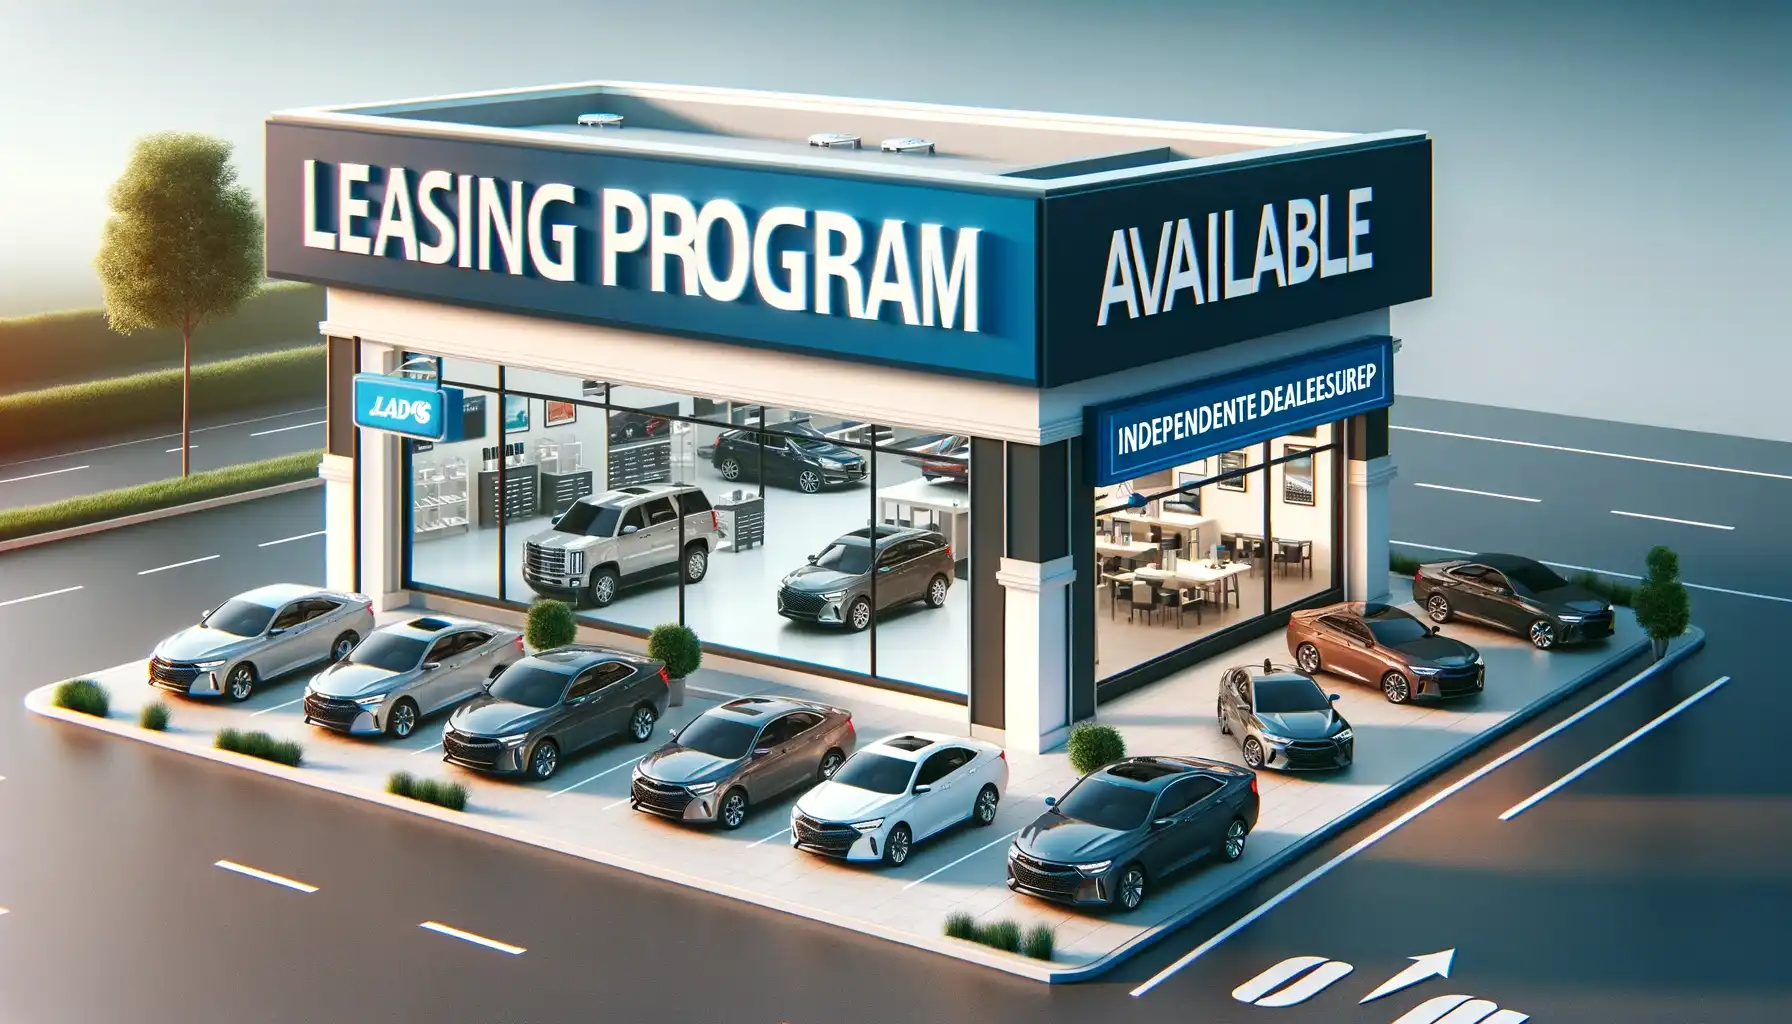 From Sales to Leases: Starting a Leasing Program at Auto Dealerships